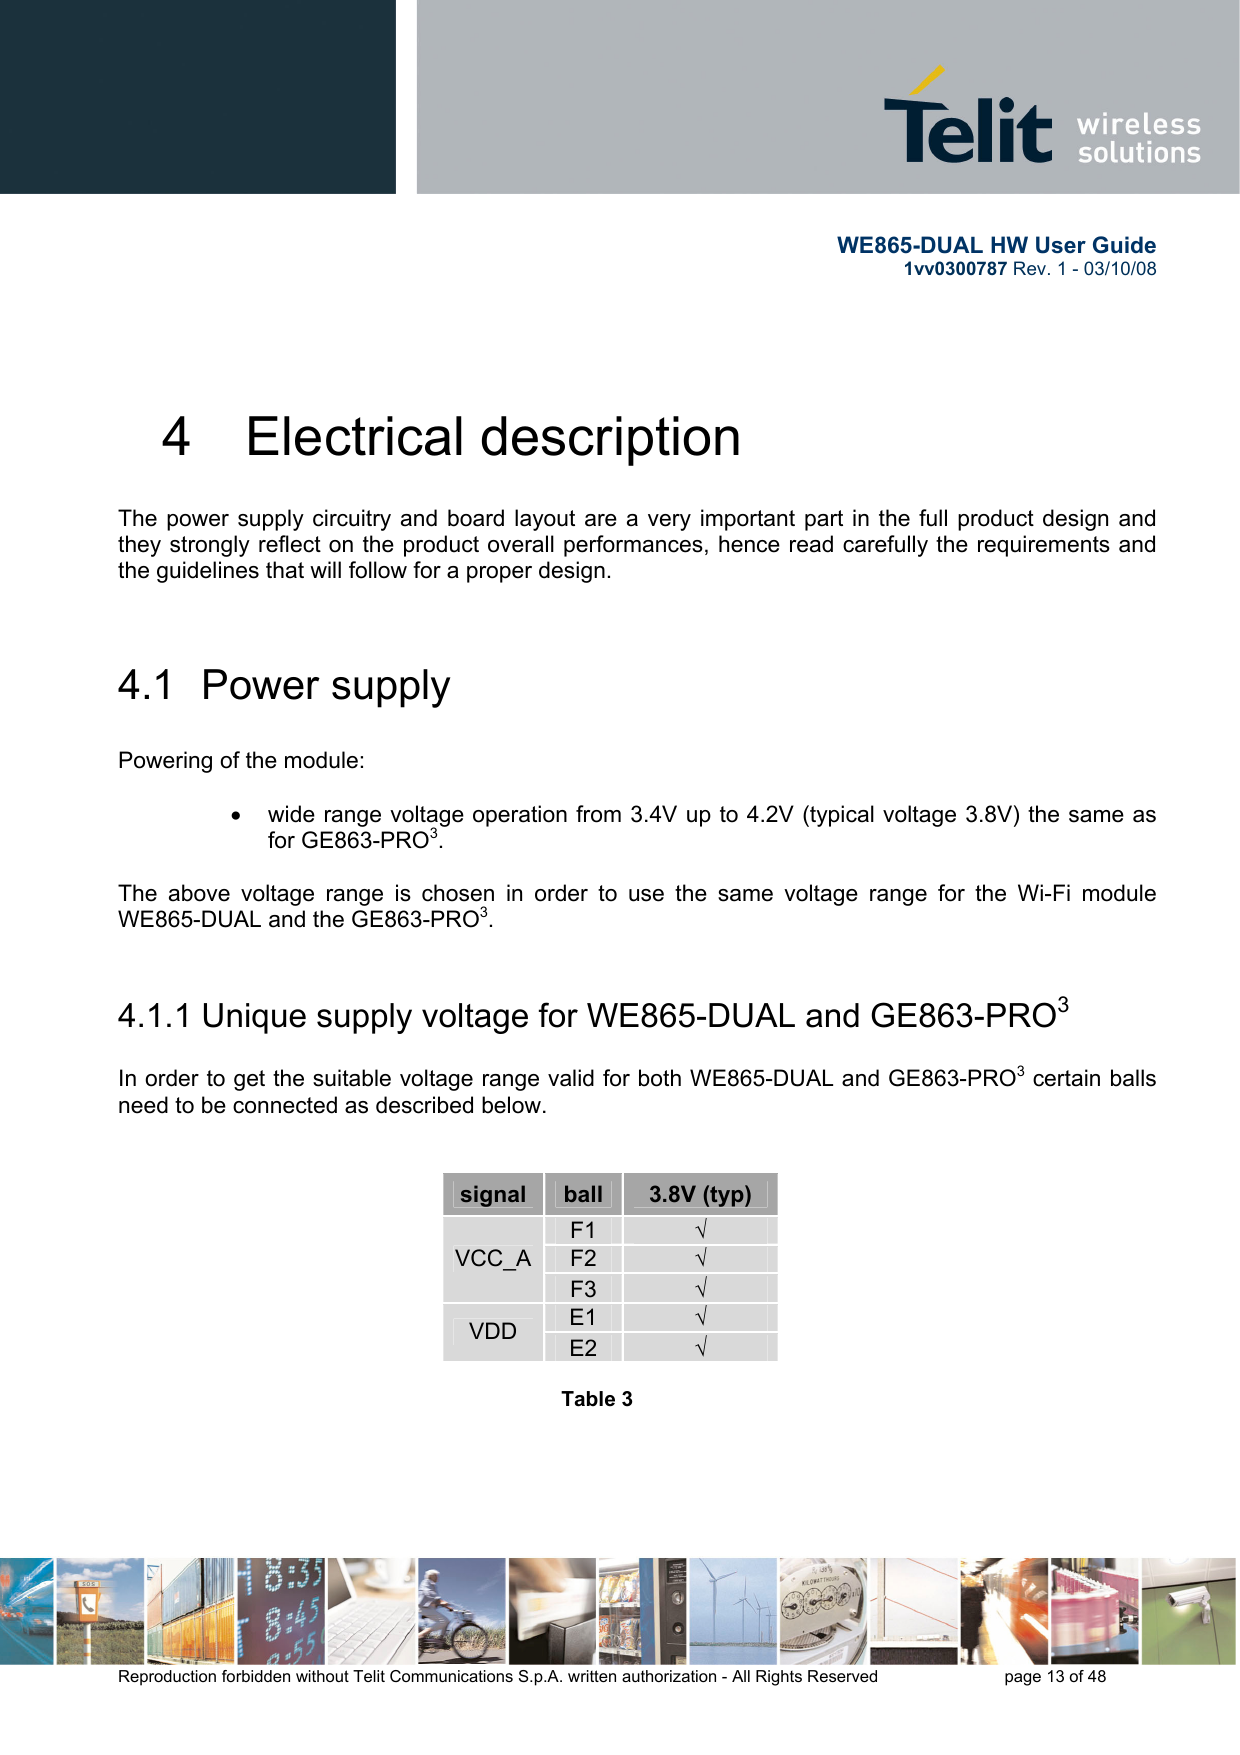       WE865-DUAL HW User Guide 1vv0300787 Rev. 1 - 03/10/08      Reproduction forbidden without Telit Communications S.p.A. written authorization - All Rights Reserved    page 13 of 48  4  Electrical description The power supply circuitry and board layout are a very important part in the full product design and they strongly reflect on the product overall performances, hence read carefully the requirements and the guidelines that will follow for a proper design.  4.1  Power supply  Powering of the module:   •  wide range voltage operation from 3.4V up to 4.2V (typical voltage 3.8V) the same as for GE863-PRO3.  The above voltage range is chosen in order to use the same voltage range for the Wi-Fi module WE865-DUAL and the GE863-PRO3.  4.1.1 Unique supply voltage for WE865-DUAL and GE863-PRO3  In order to get the suitable voltage range valid for both WE865-DUAL and GE863-PRO3 certain balls need to be connected as described below.   signal  ball  3.8V (typ) F1  √ F2  √ VCC_AF3  √ E1  √ VDD  E2  √  Table 3                                                                                